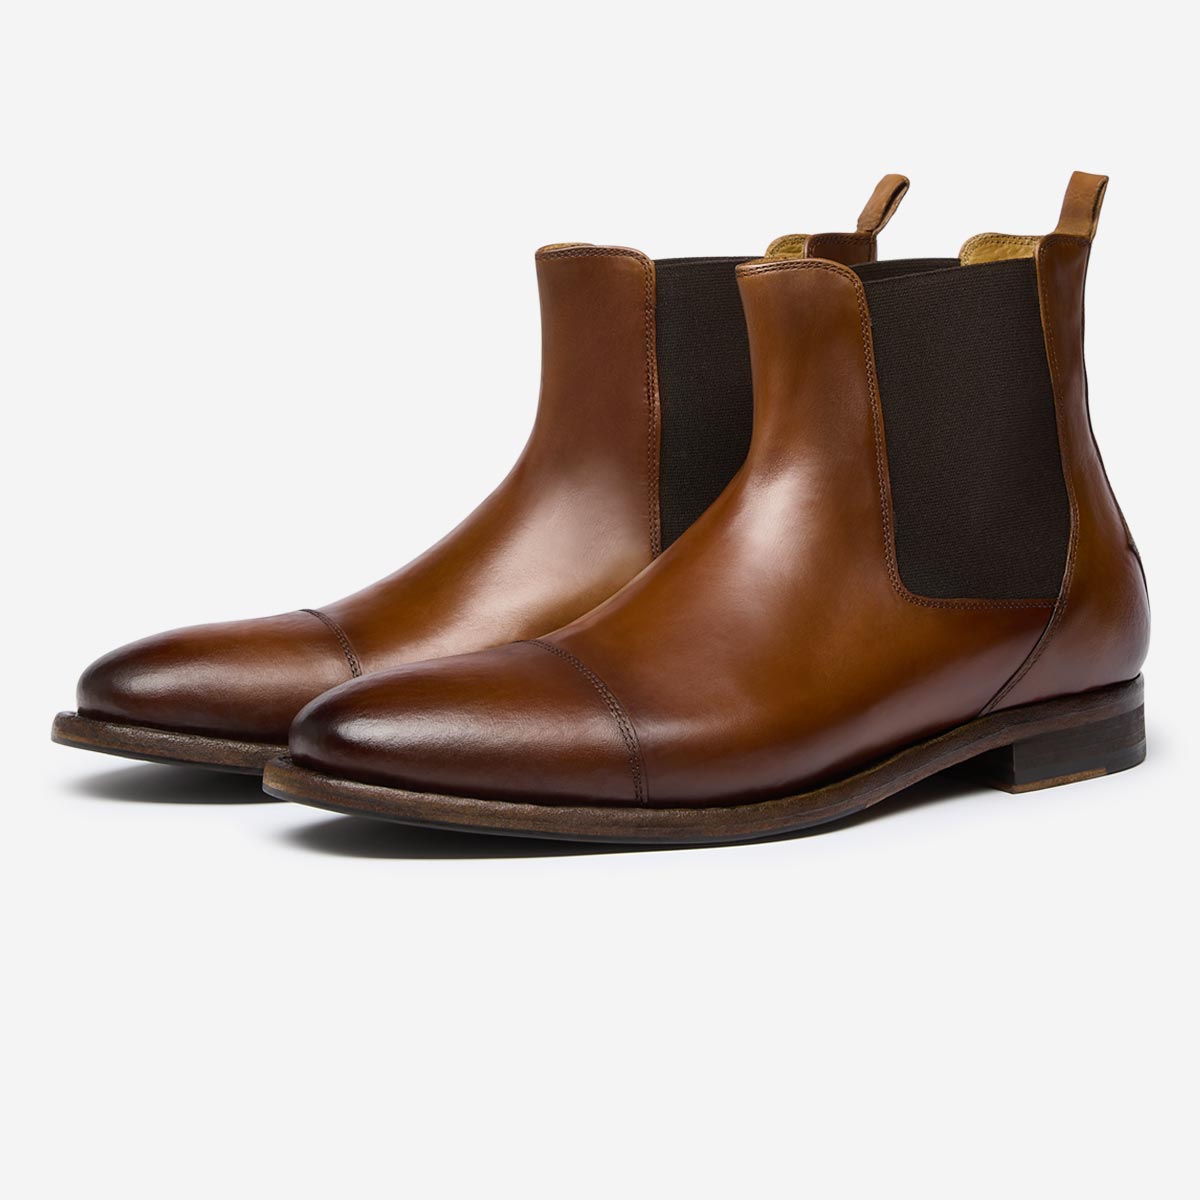 Cadotto Dark Tan Chelsea Boots | Men's Boots | Oliver Sweeney